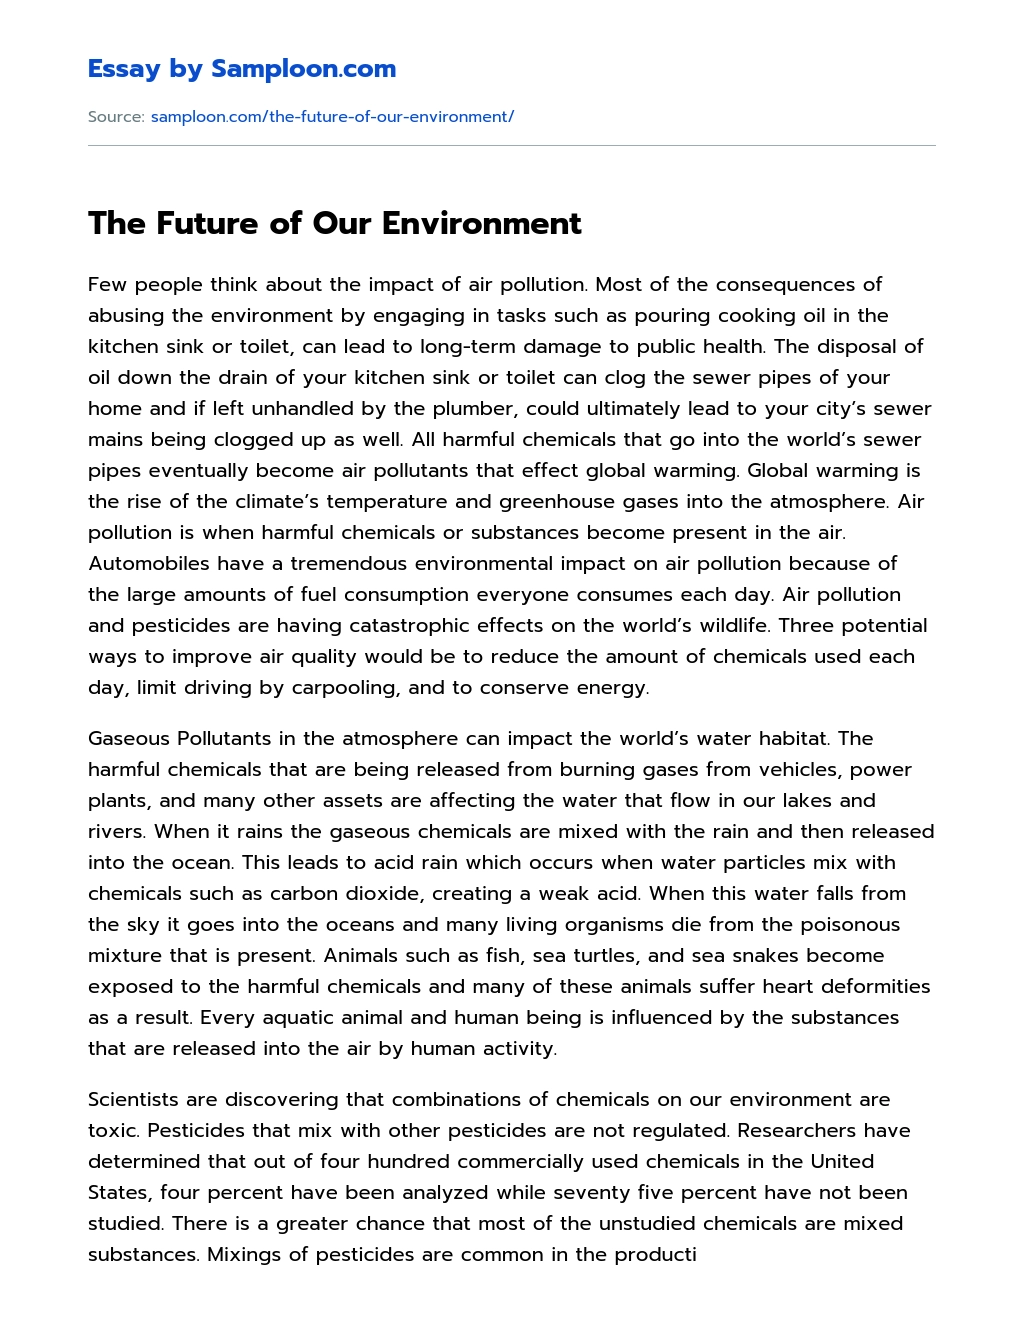 The Future of Our Environment essay